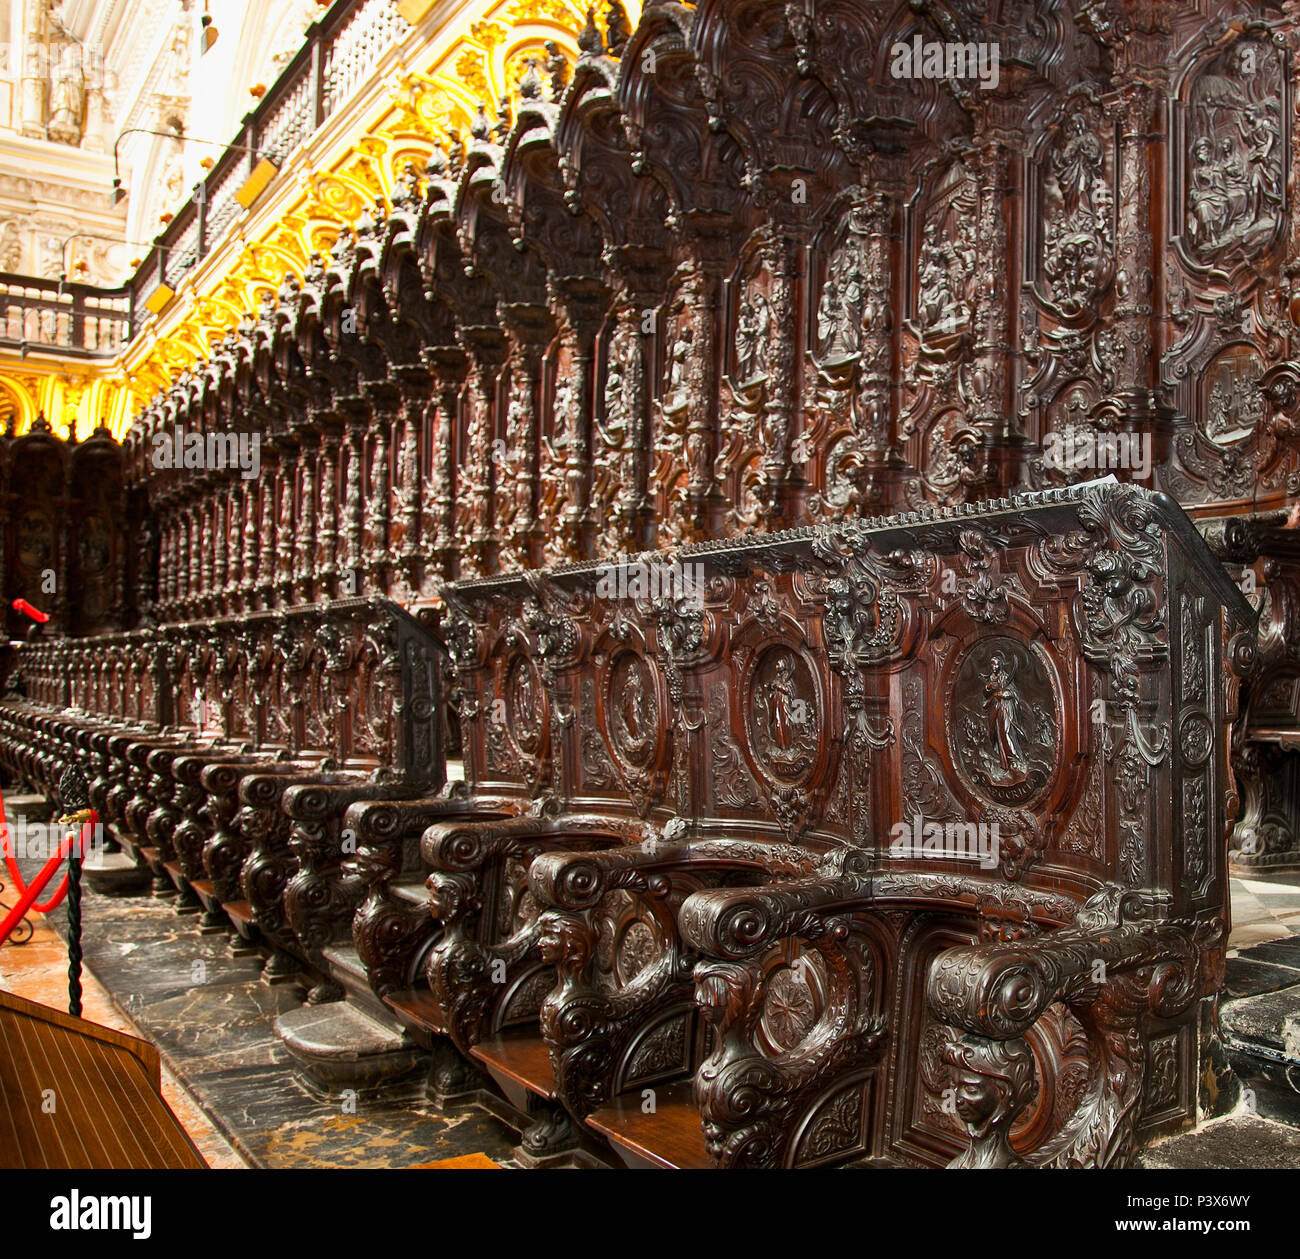 Beautiful choir medieval wood carving of the Mezquita Catholic cathedral in Cordoba, Spain. Stock Photo